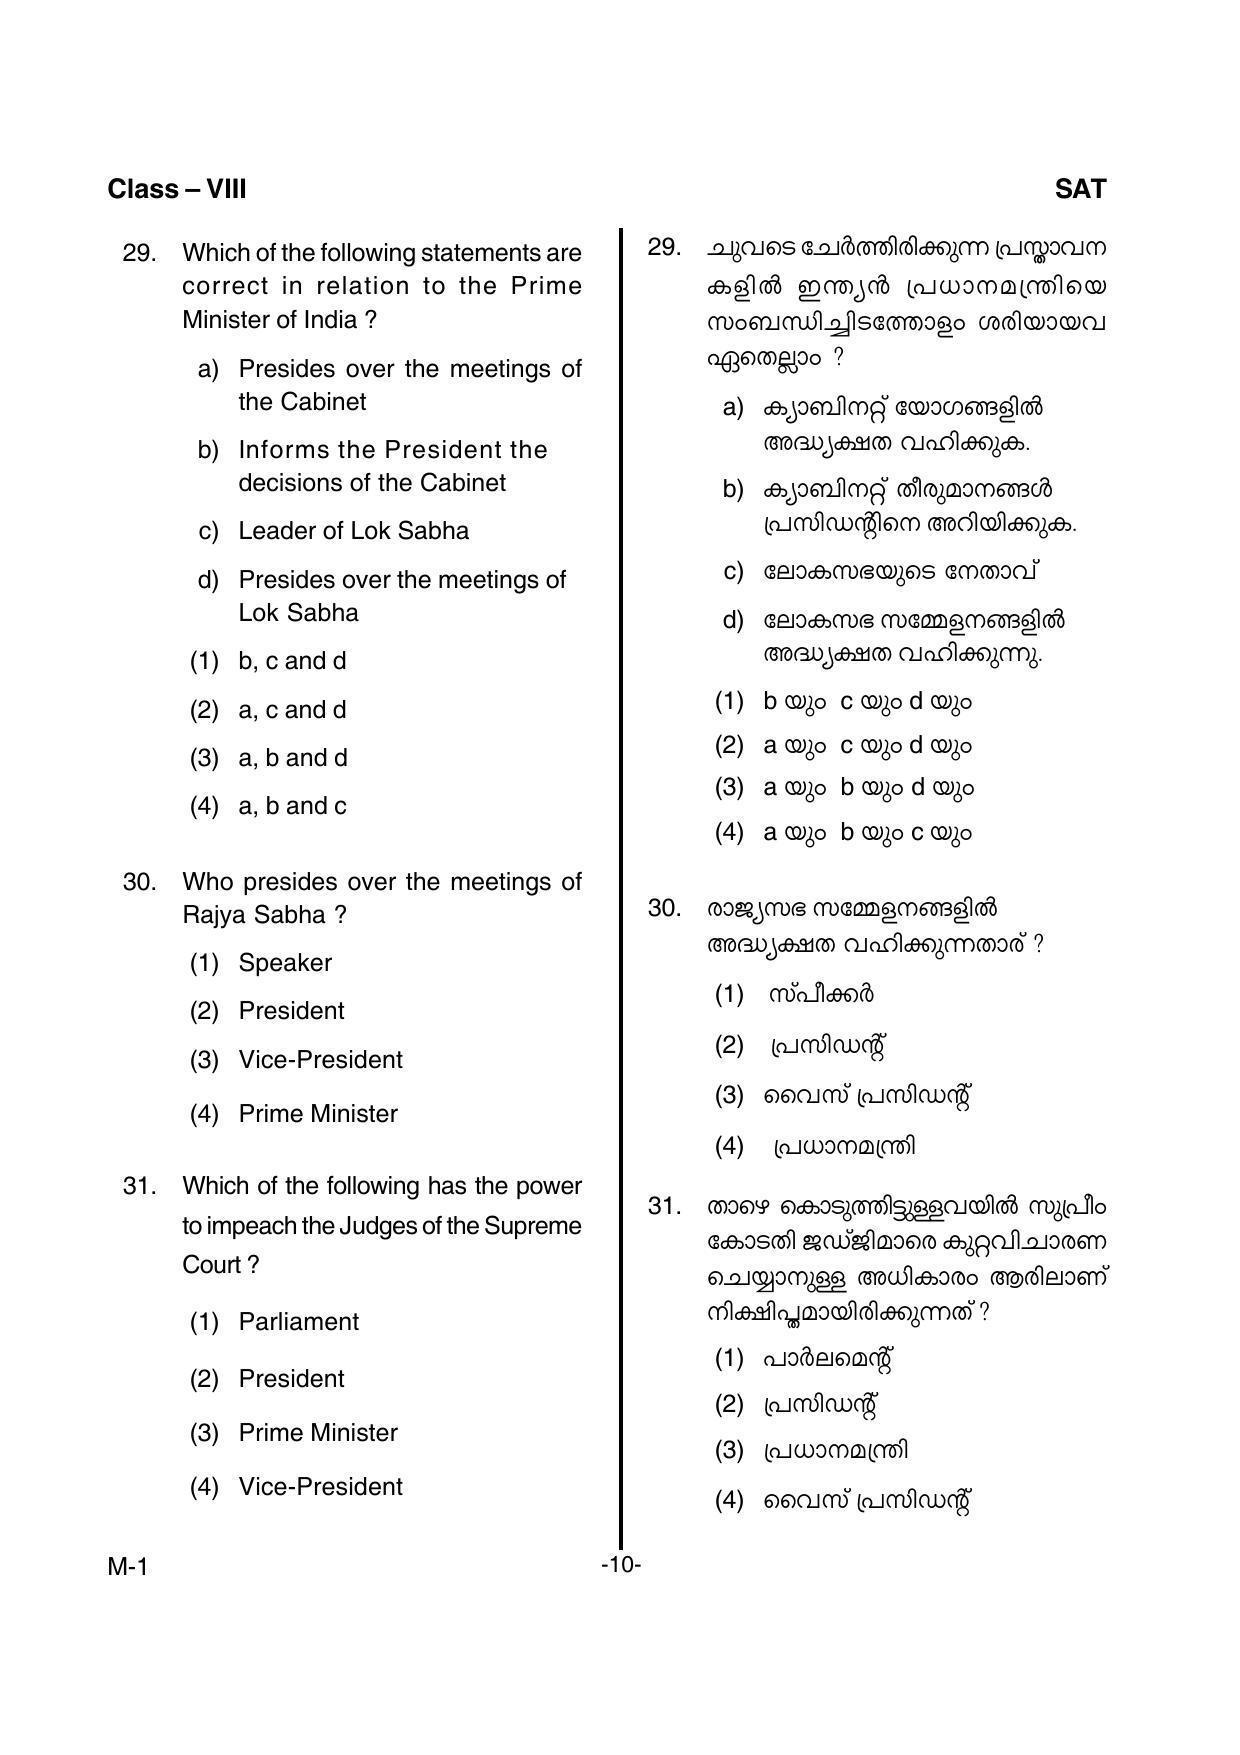 MAT 2016 Class 8 Kerala NMMS Question Papers - Page 12